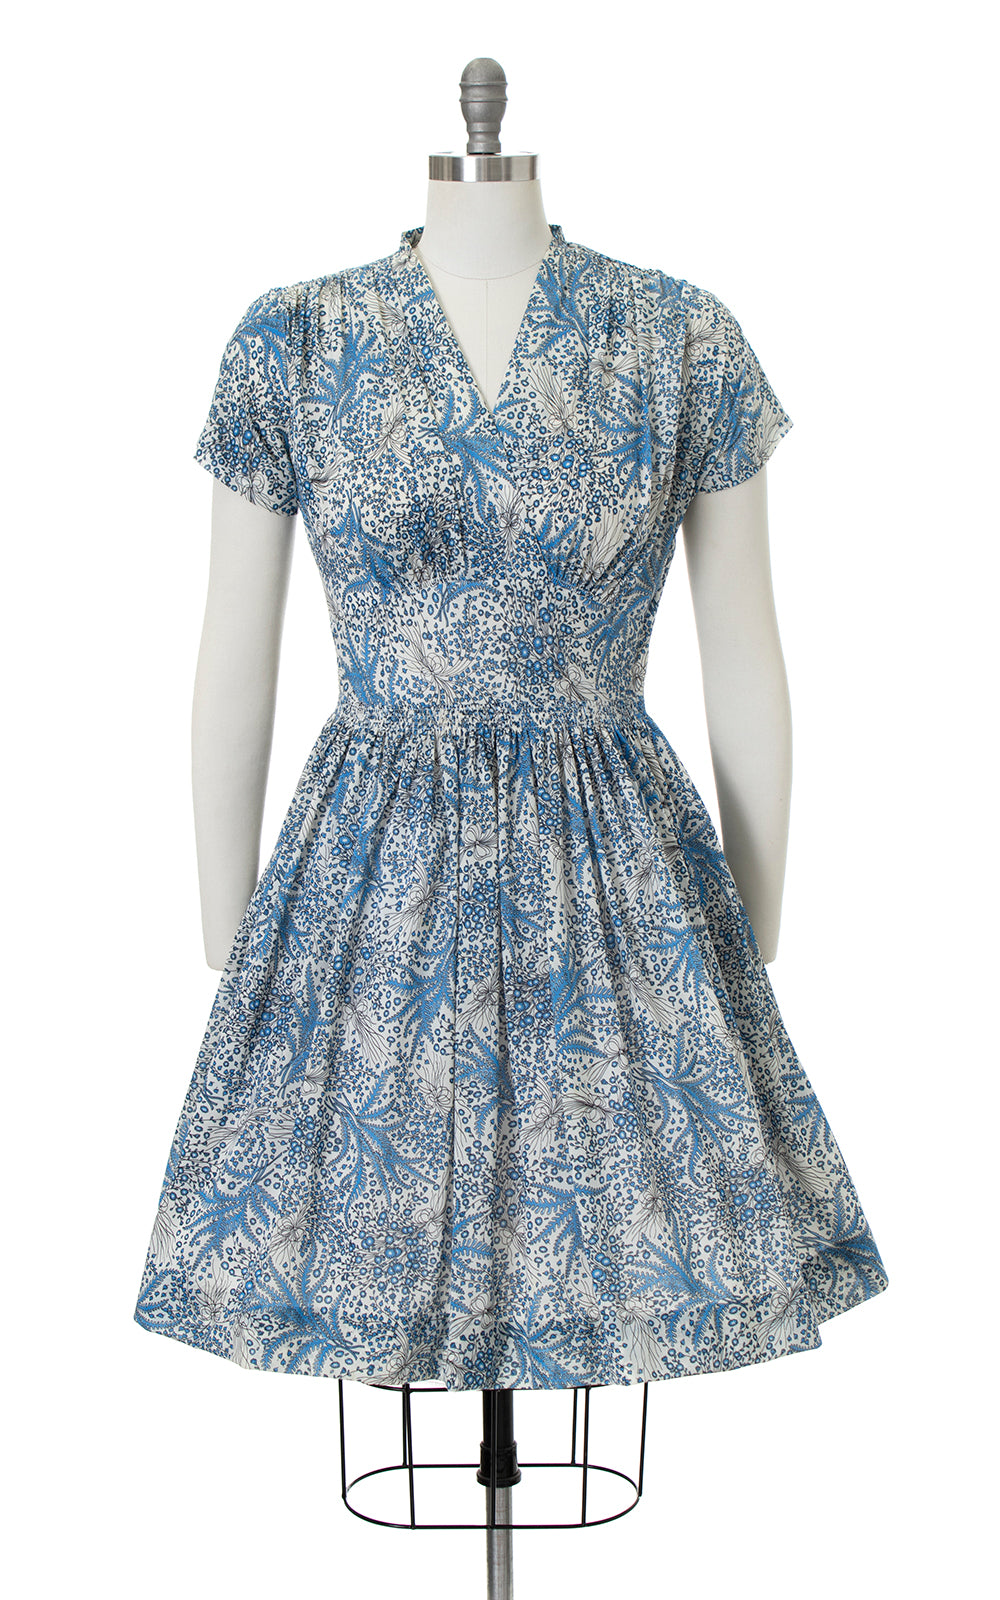 Vintage 1940s Floral Bouquet + Fern Print Jersey Dress by Birthday Life Vintage